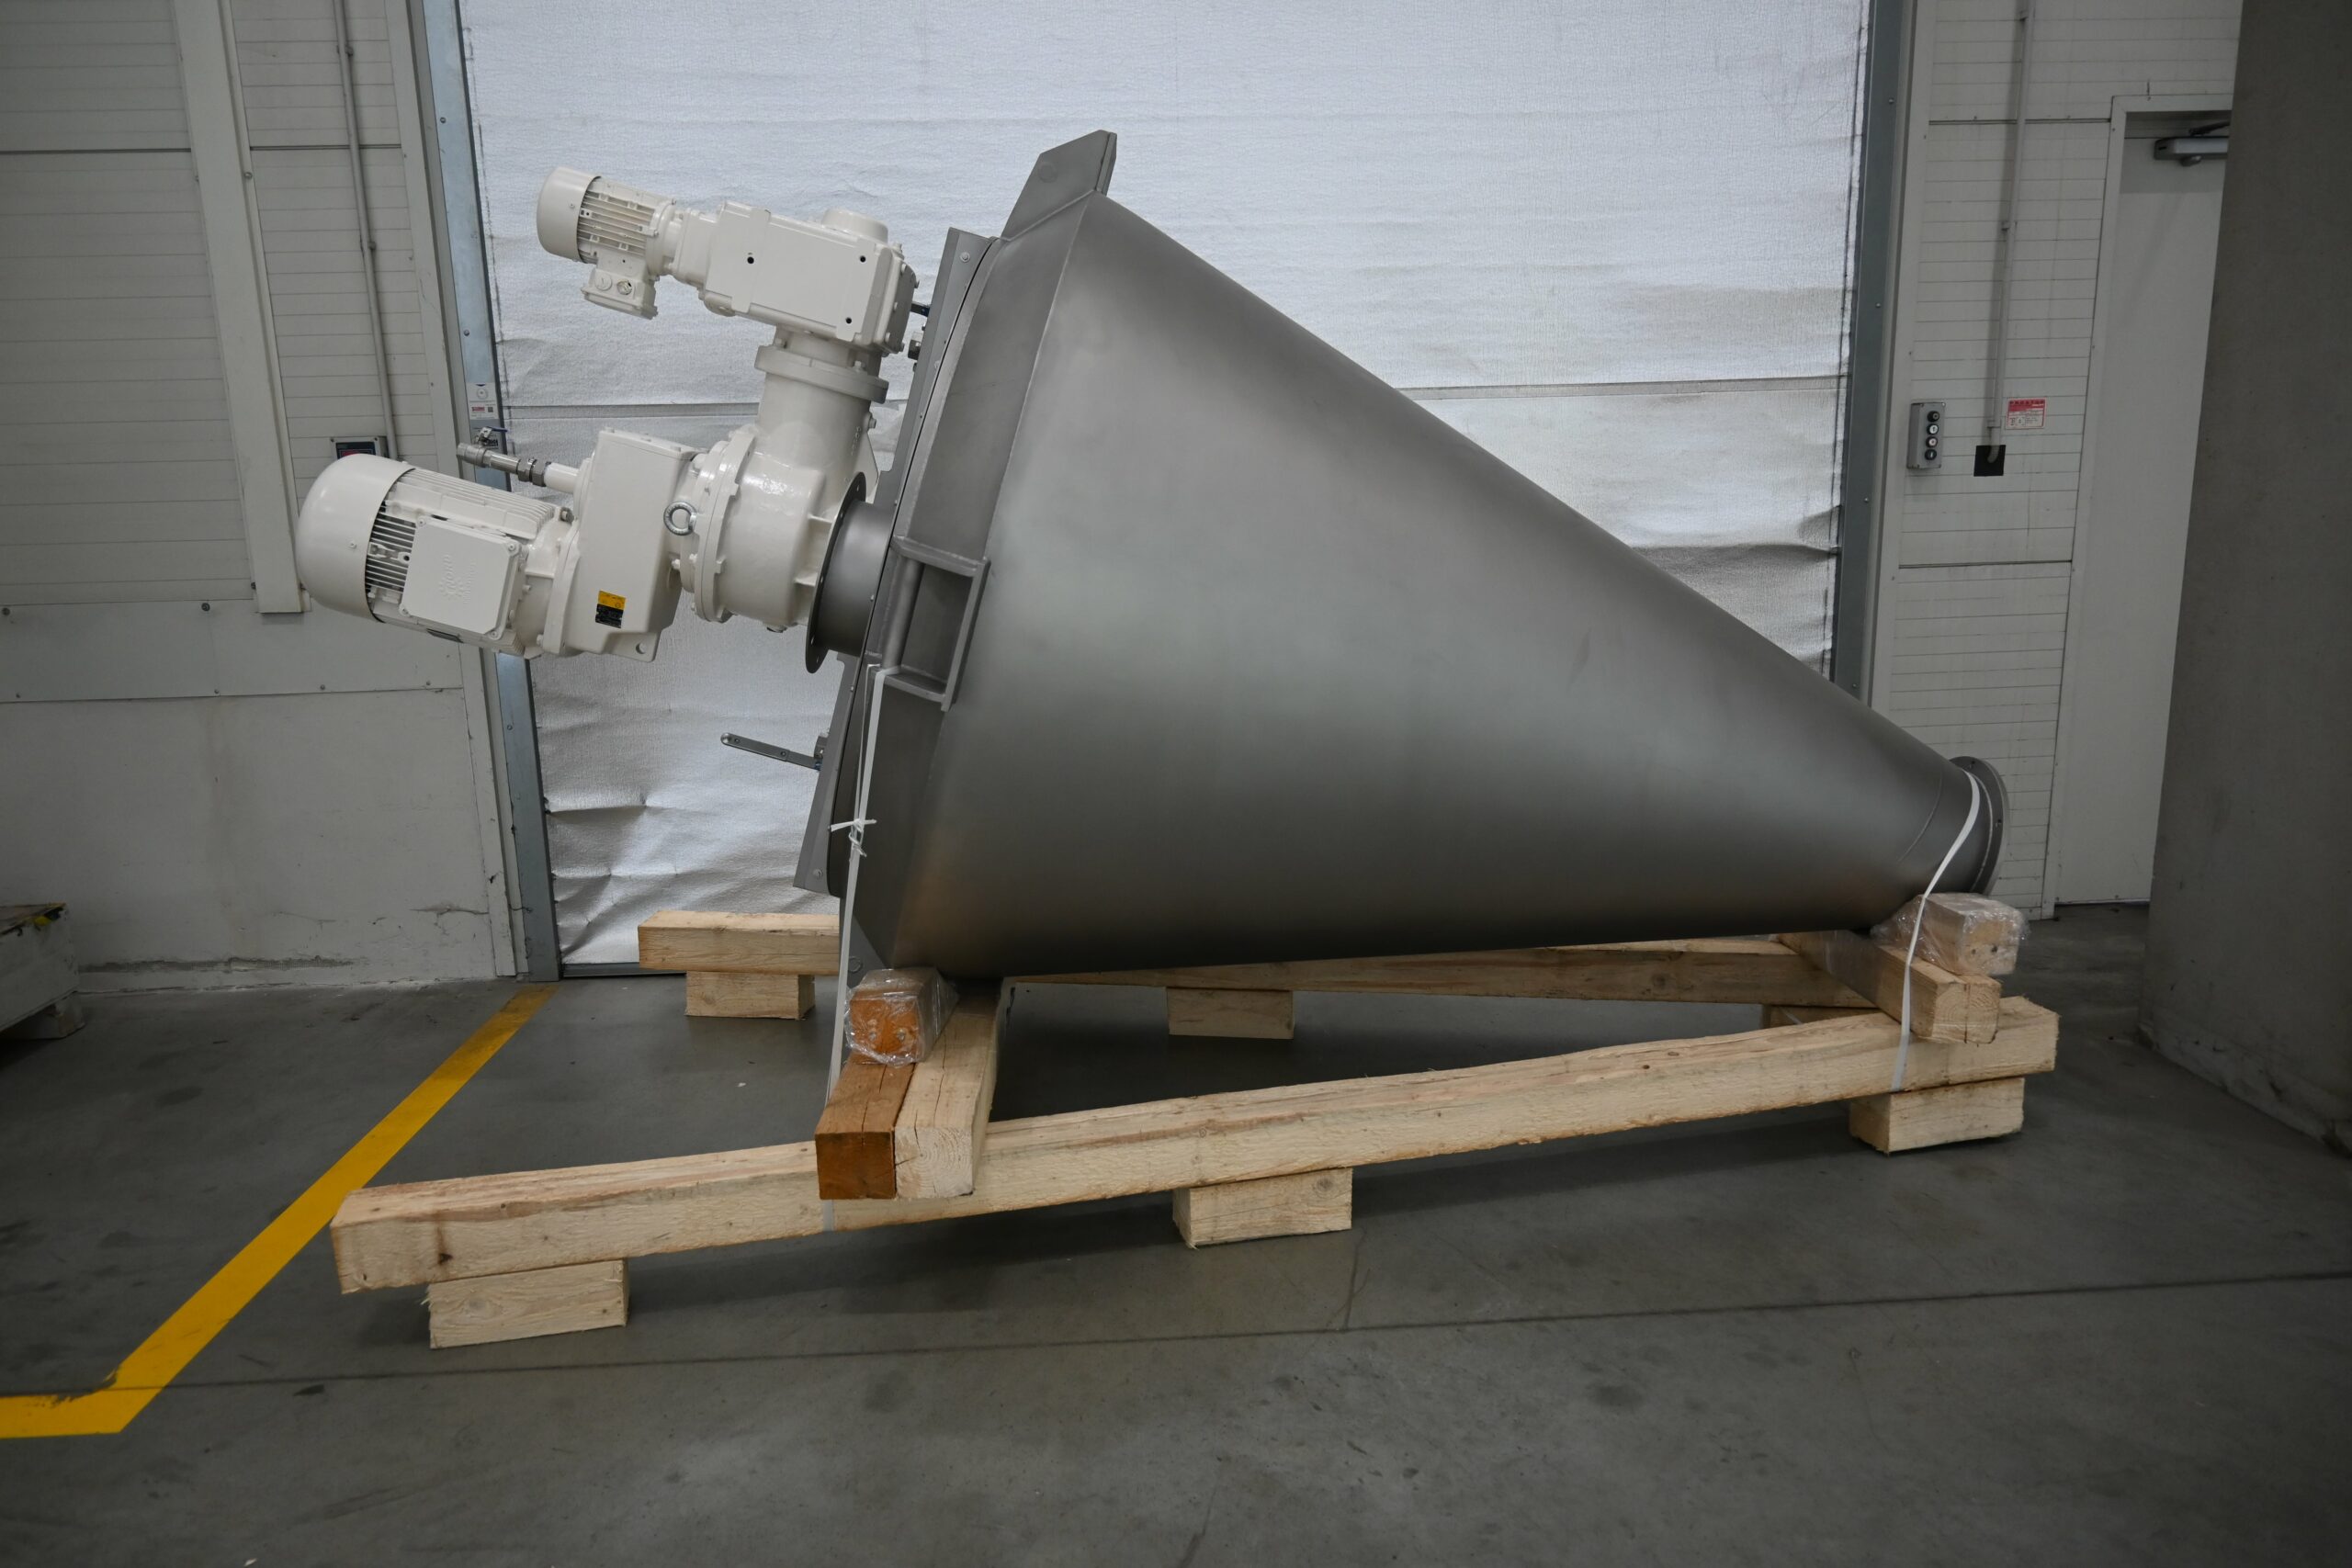 Newly manufactured HV1000 conical mixer for mixing wolfram oxides!